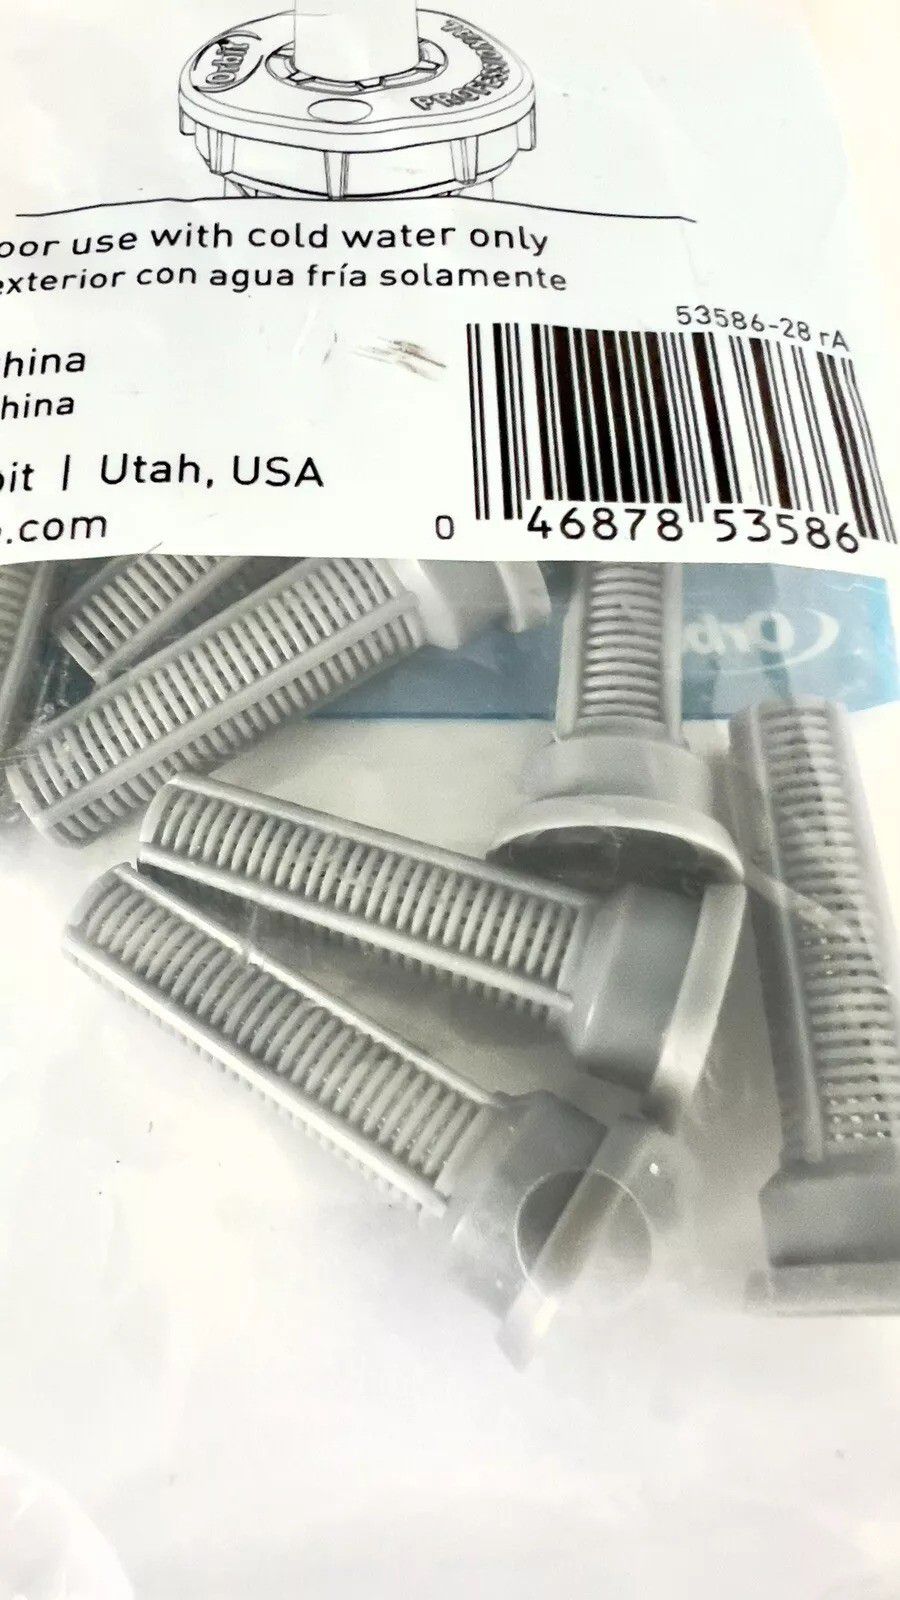 10-Packs Orbit Nozzle Filters Replaces Female Thread Nozzle Filter Fast Shipping